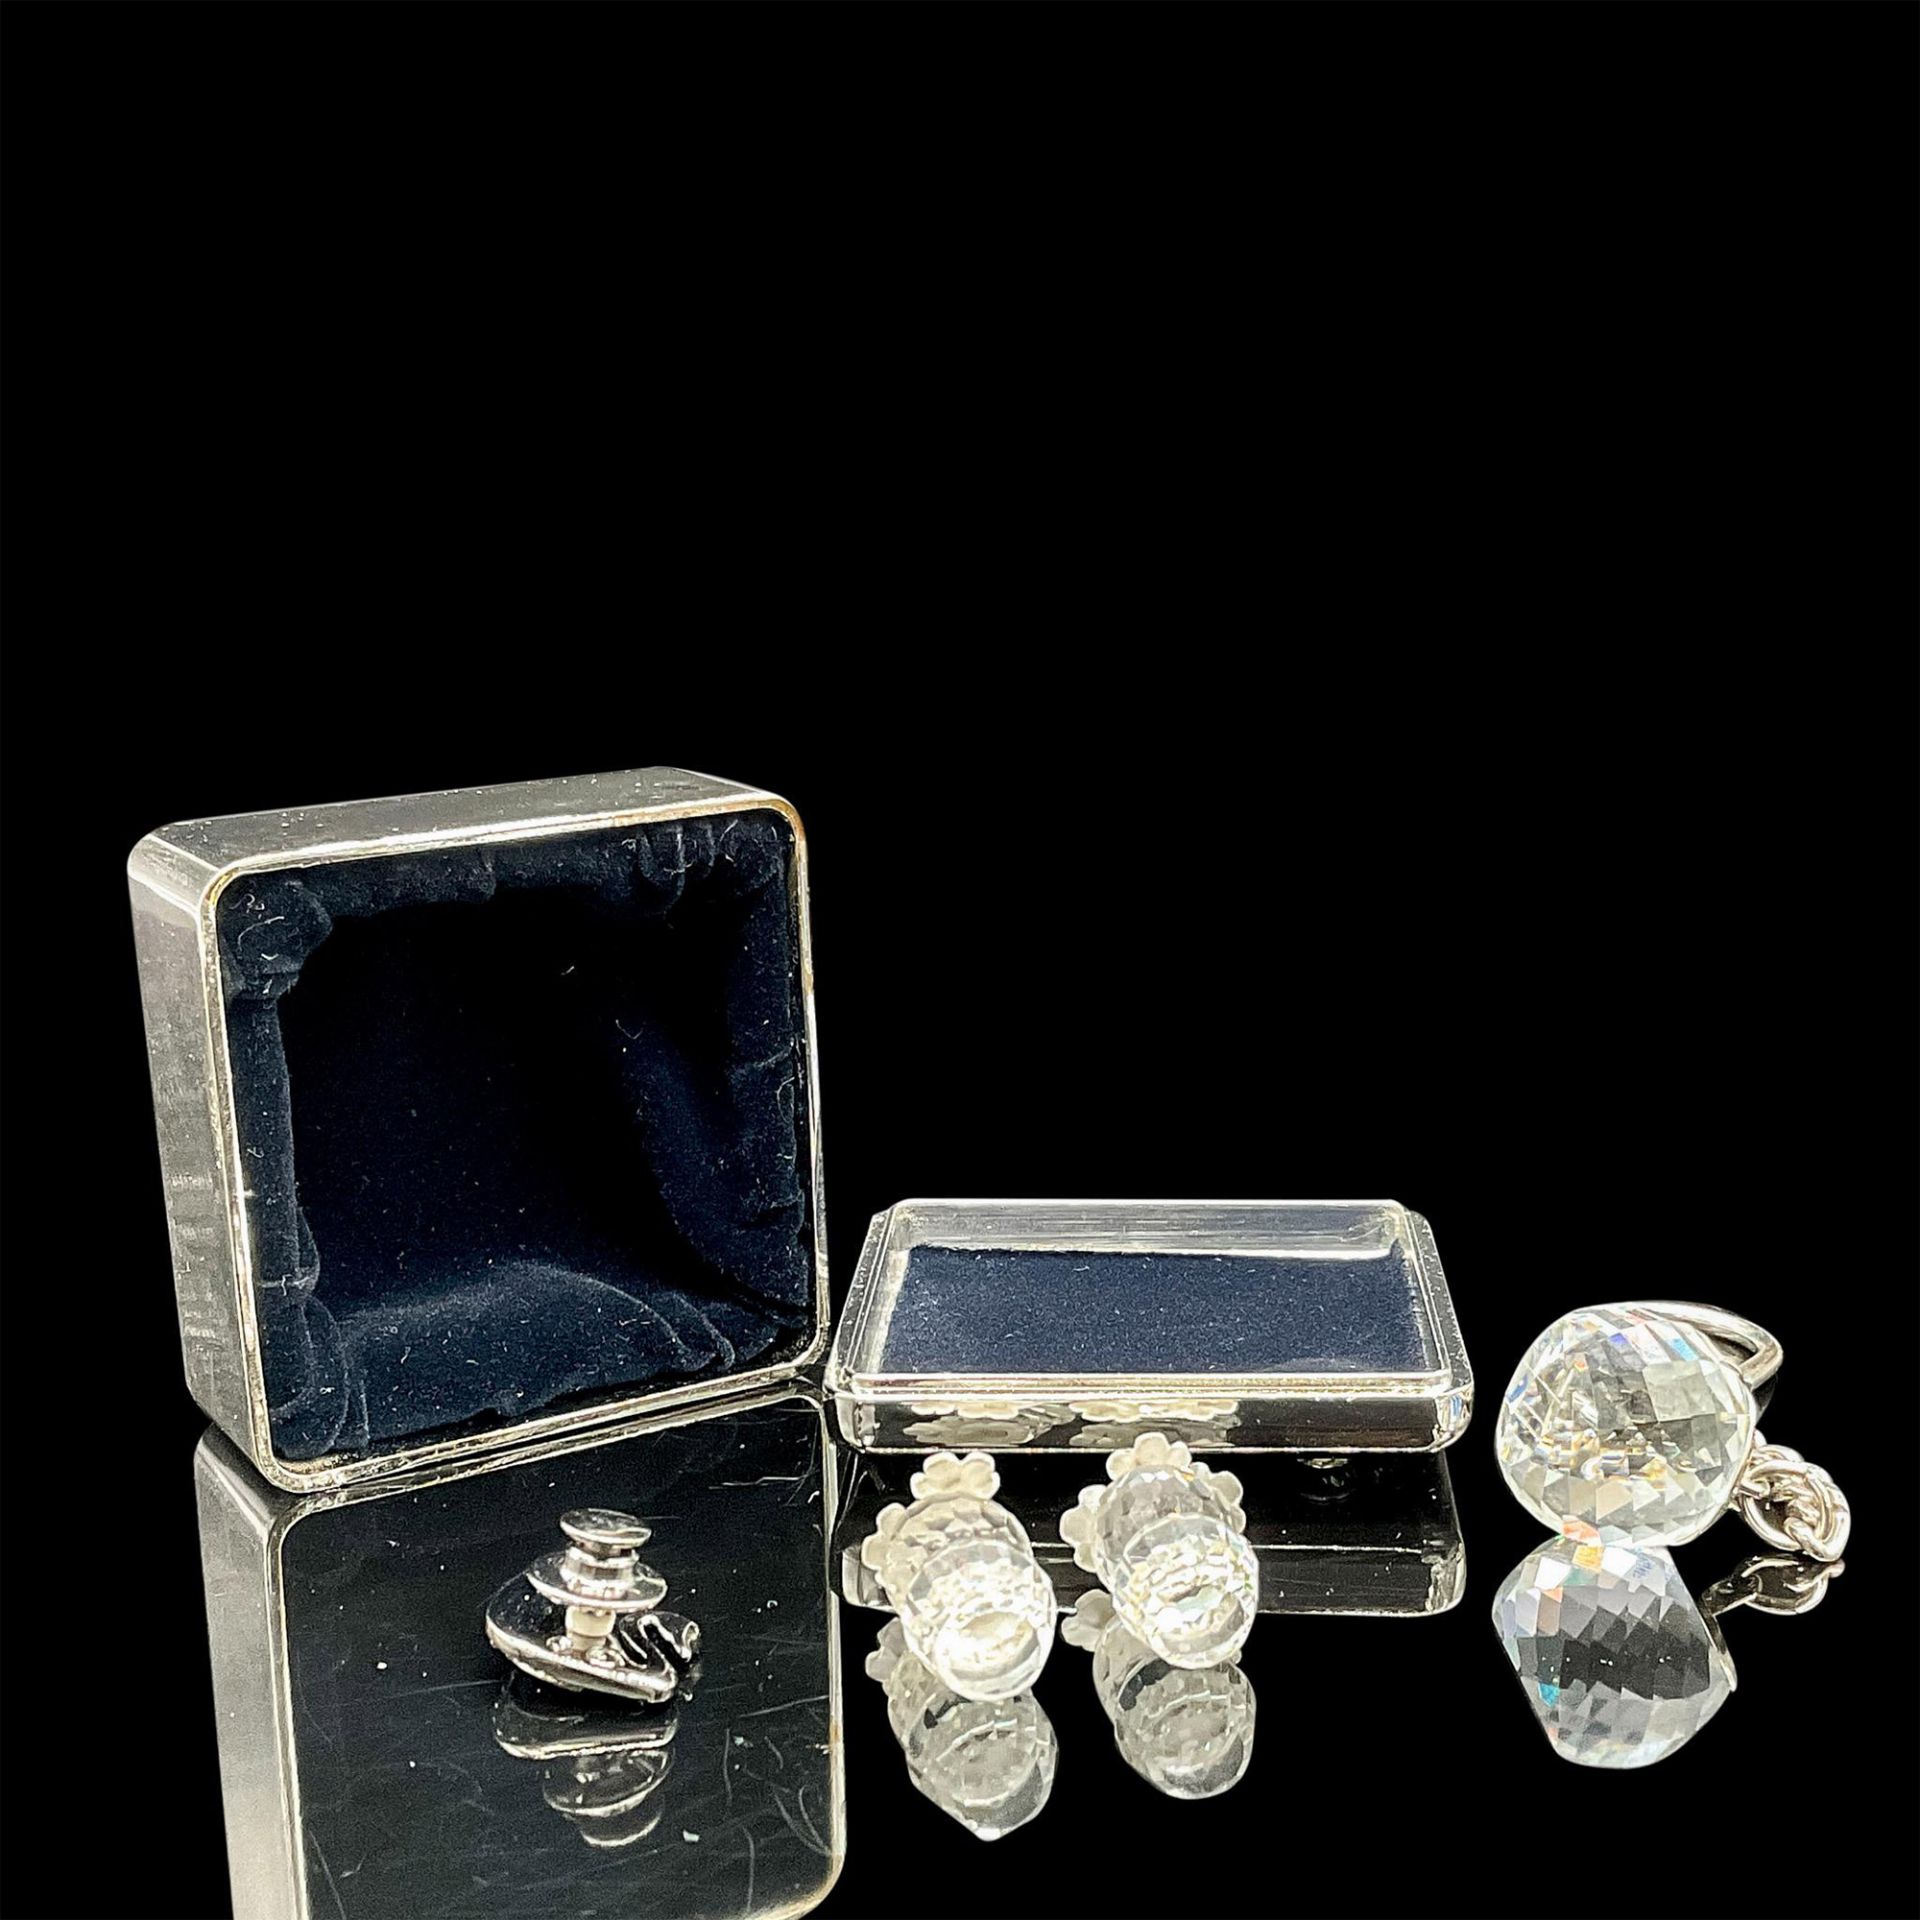 5pc Swarovski Crystal Pieces with Small Ring Box - Image 3 of 3